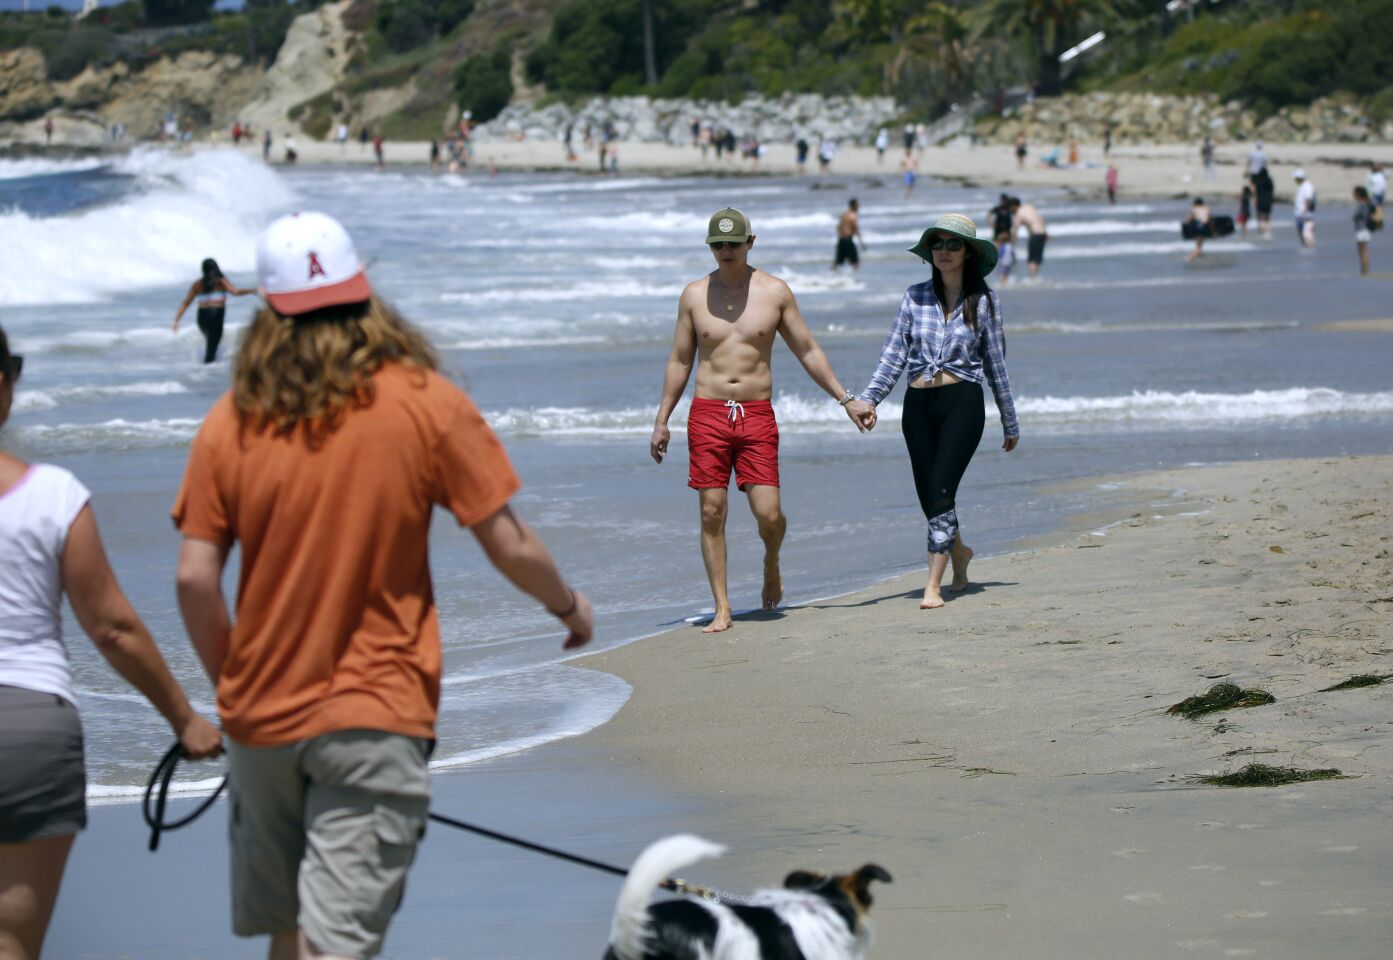 Dermatologists Dr. Anthony Huynh, center left, and Dr. Diana Zhang, both 47 and from Laguna Beach, enjoy a walk on the beach on a warm sunny day in Laguna Beach on Saturday.